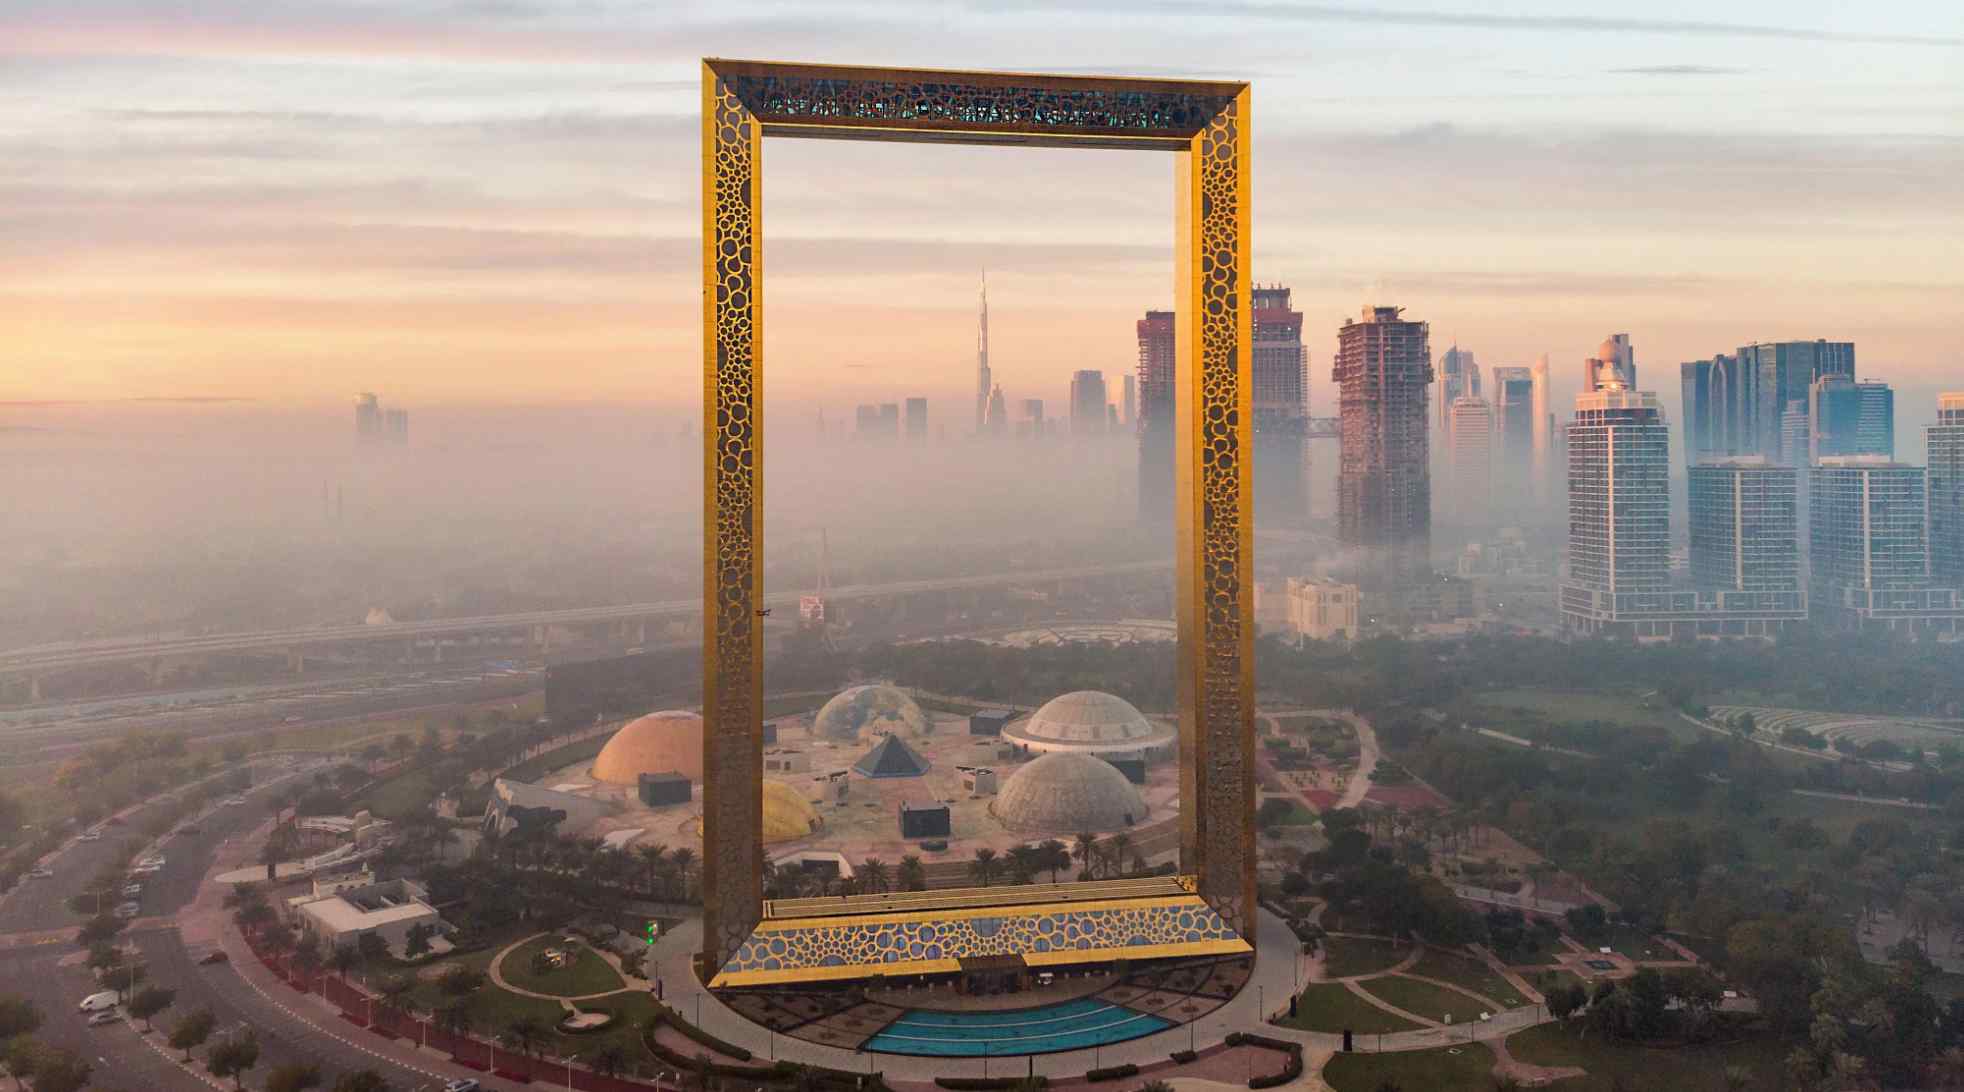 In 2009, ThyssenKrupp Elevator International organized a competition to design the Dubai Frame.